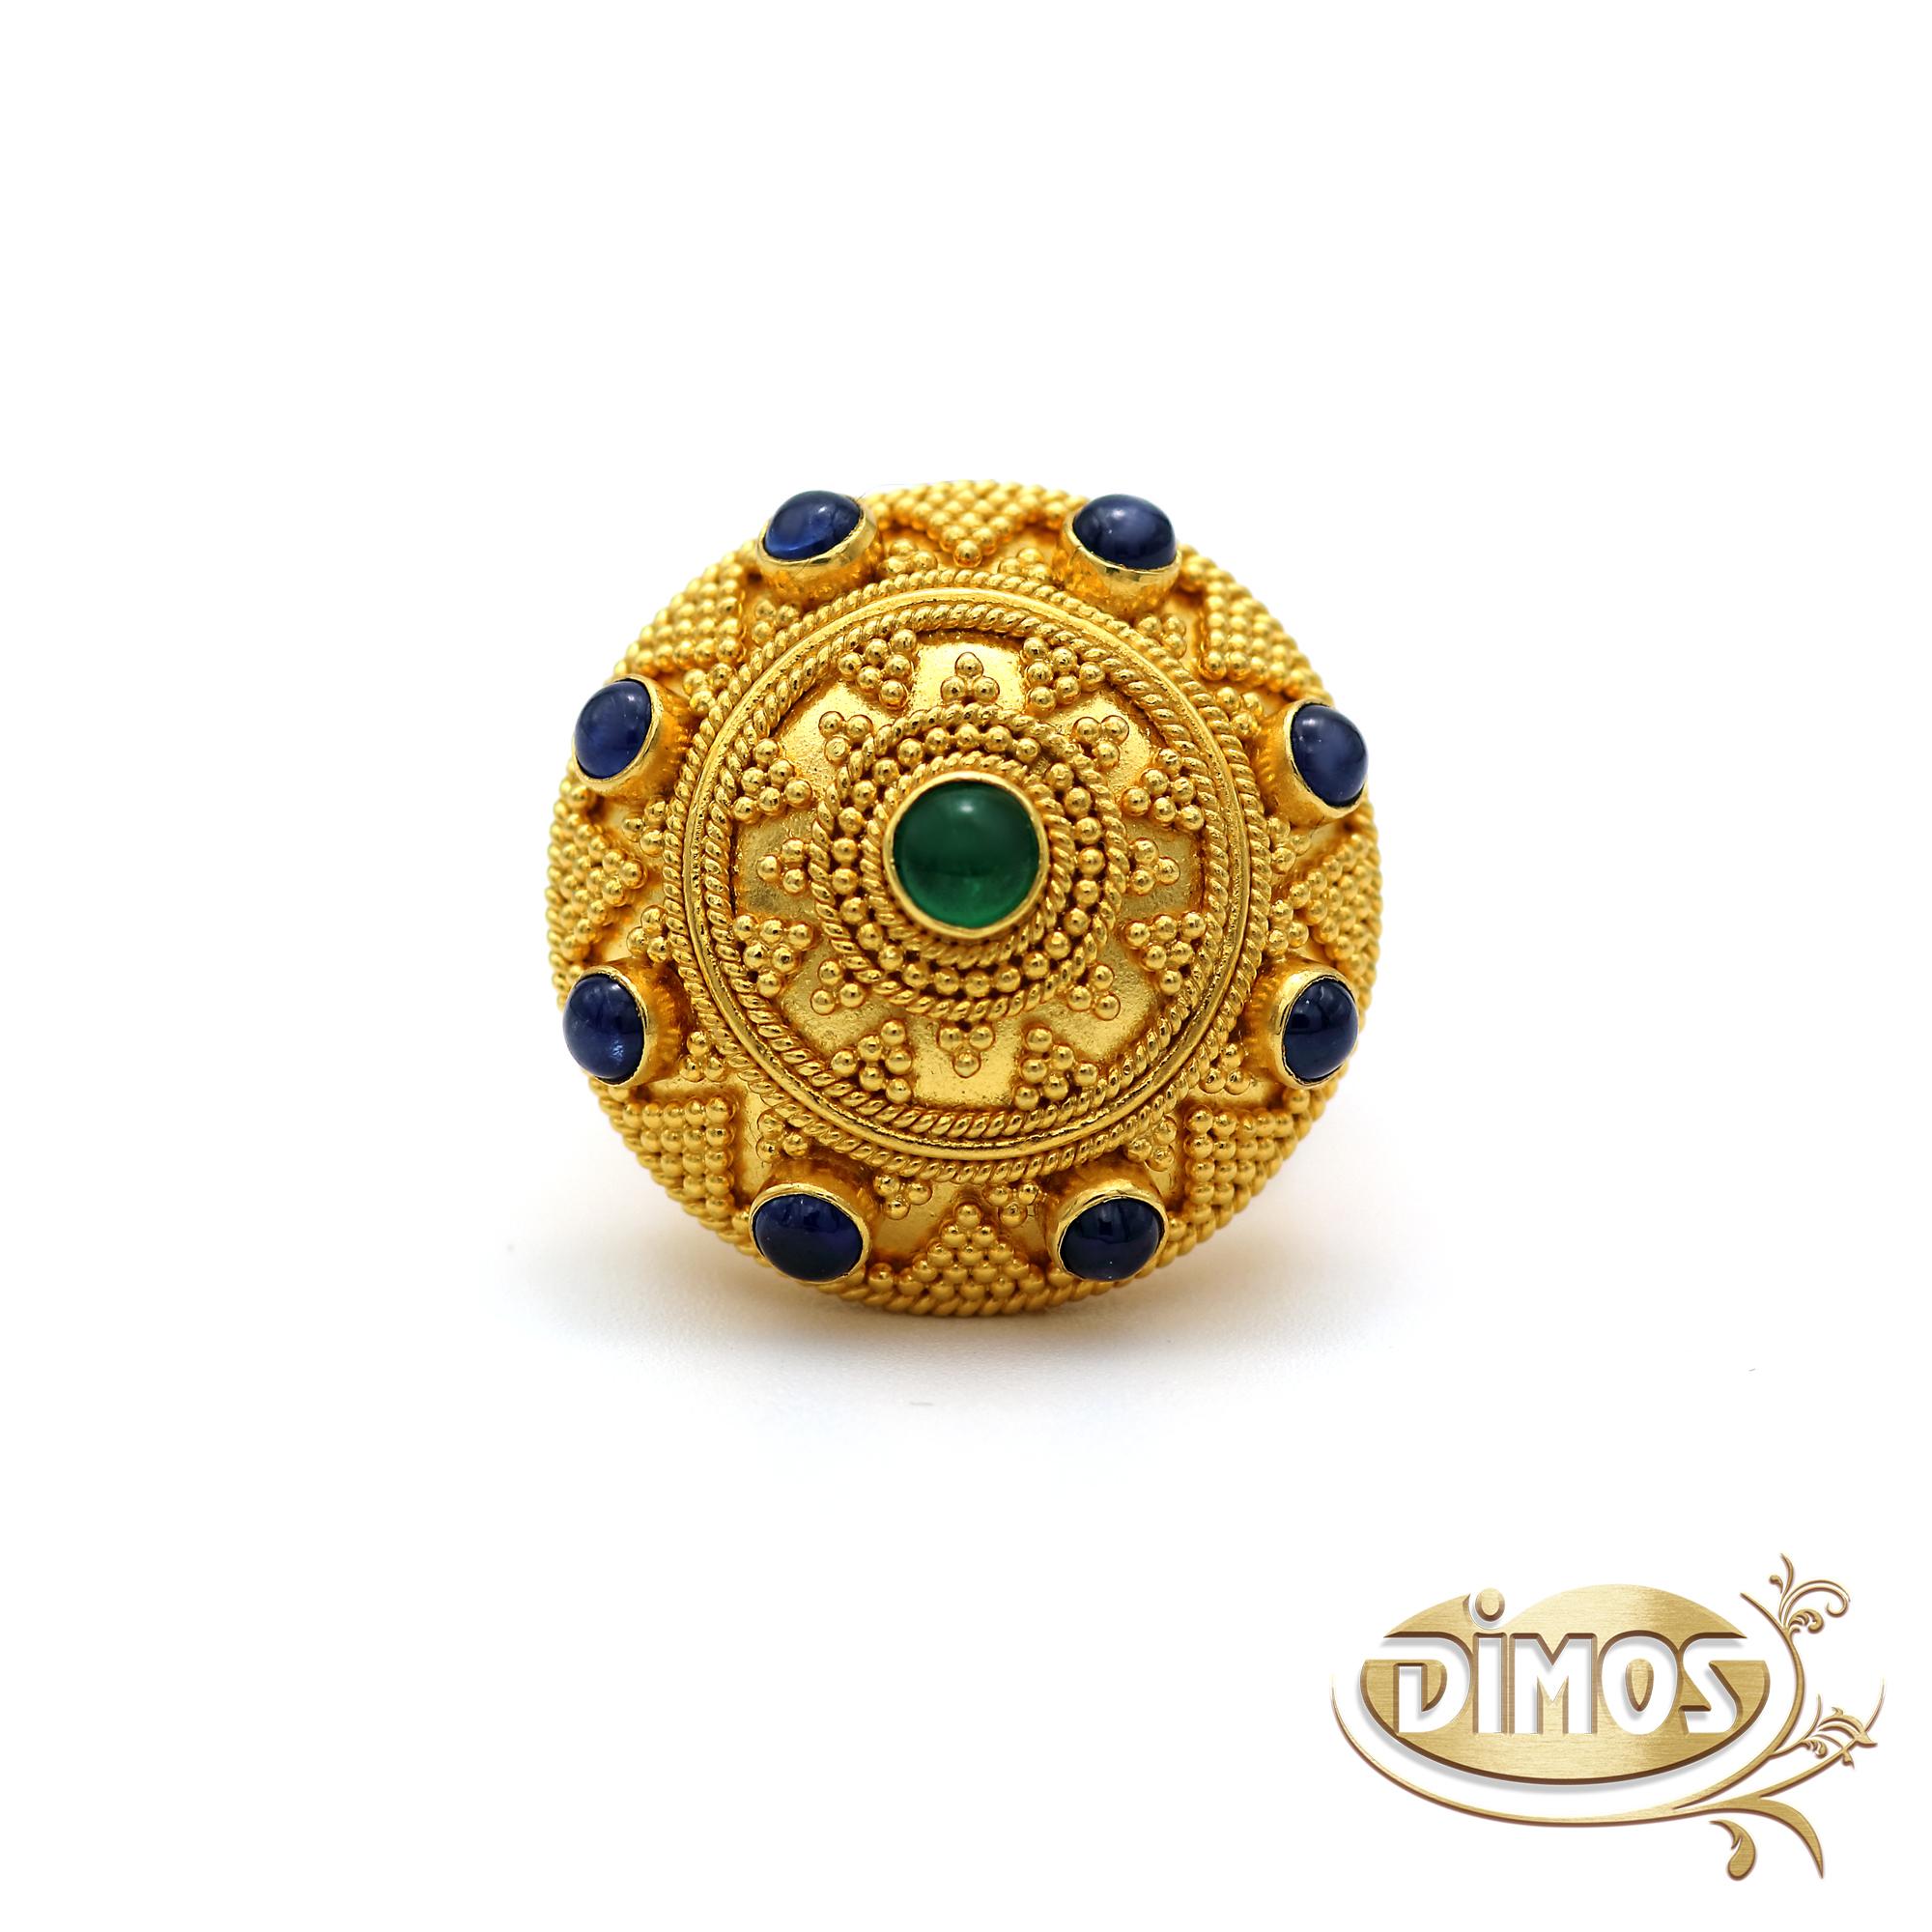 Women's Dimos 22k Gold Byzantine Dome Cocktail Ring  For Sale